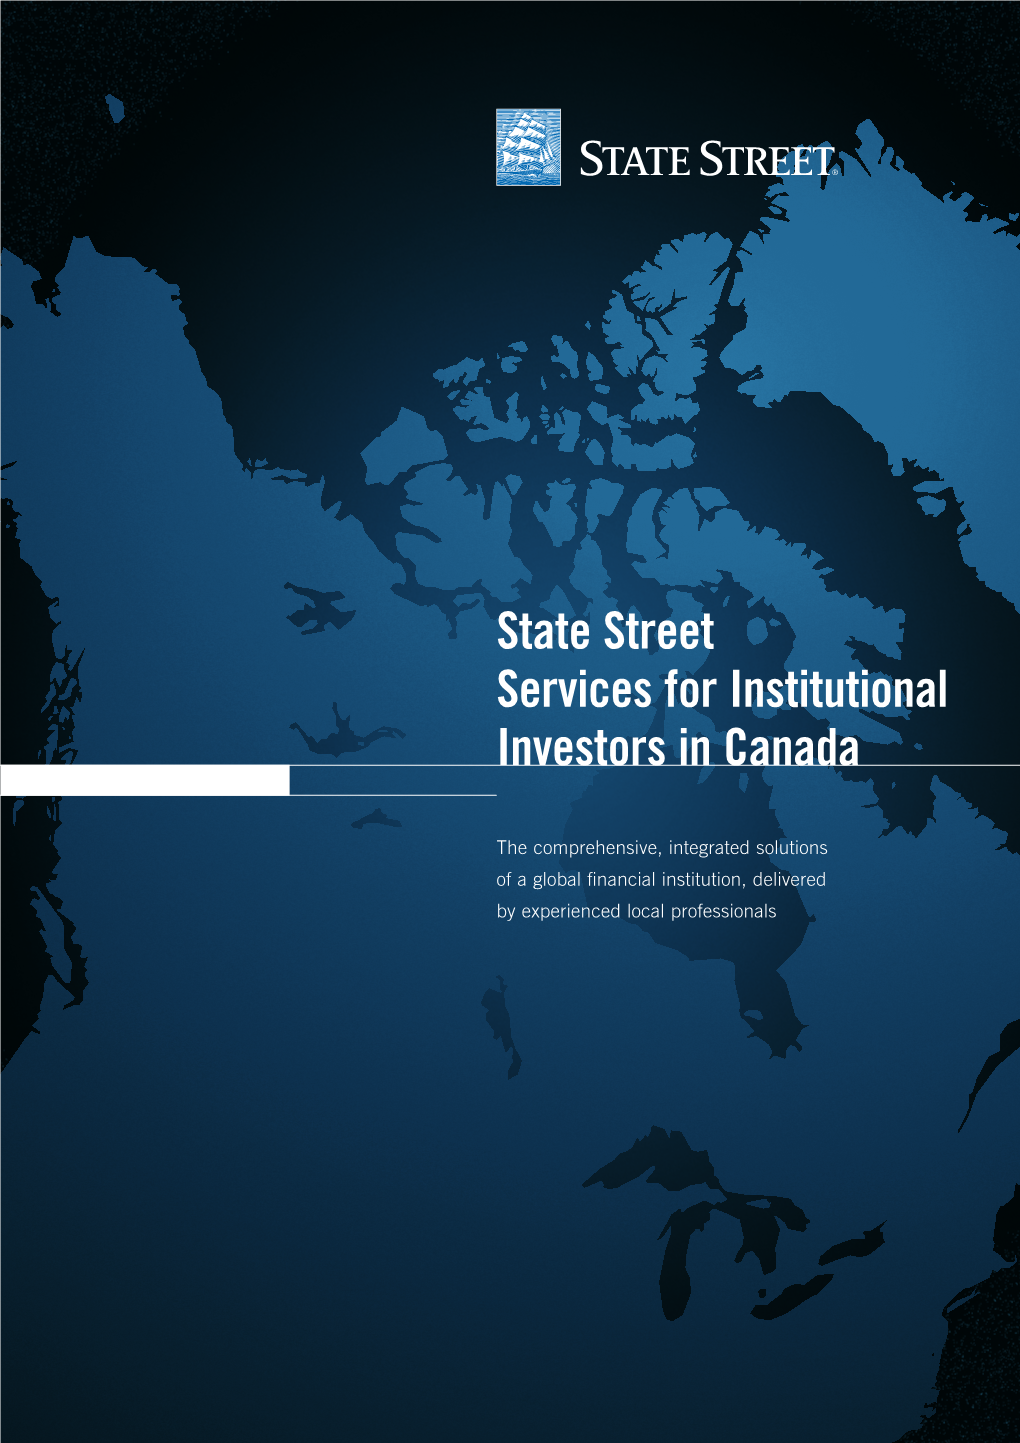 State Street Services for Institutional Investors in Canada